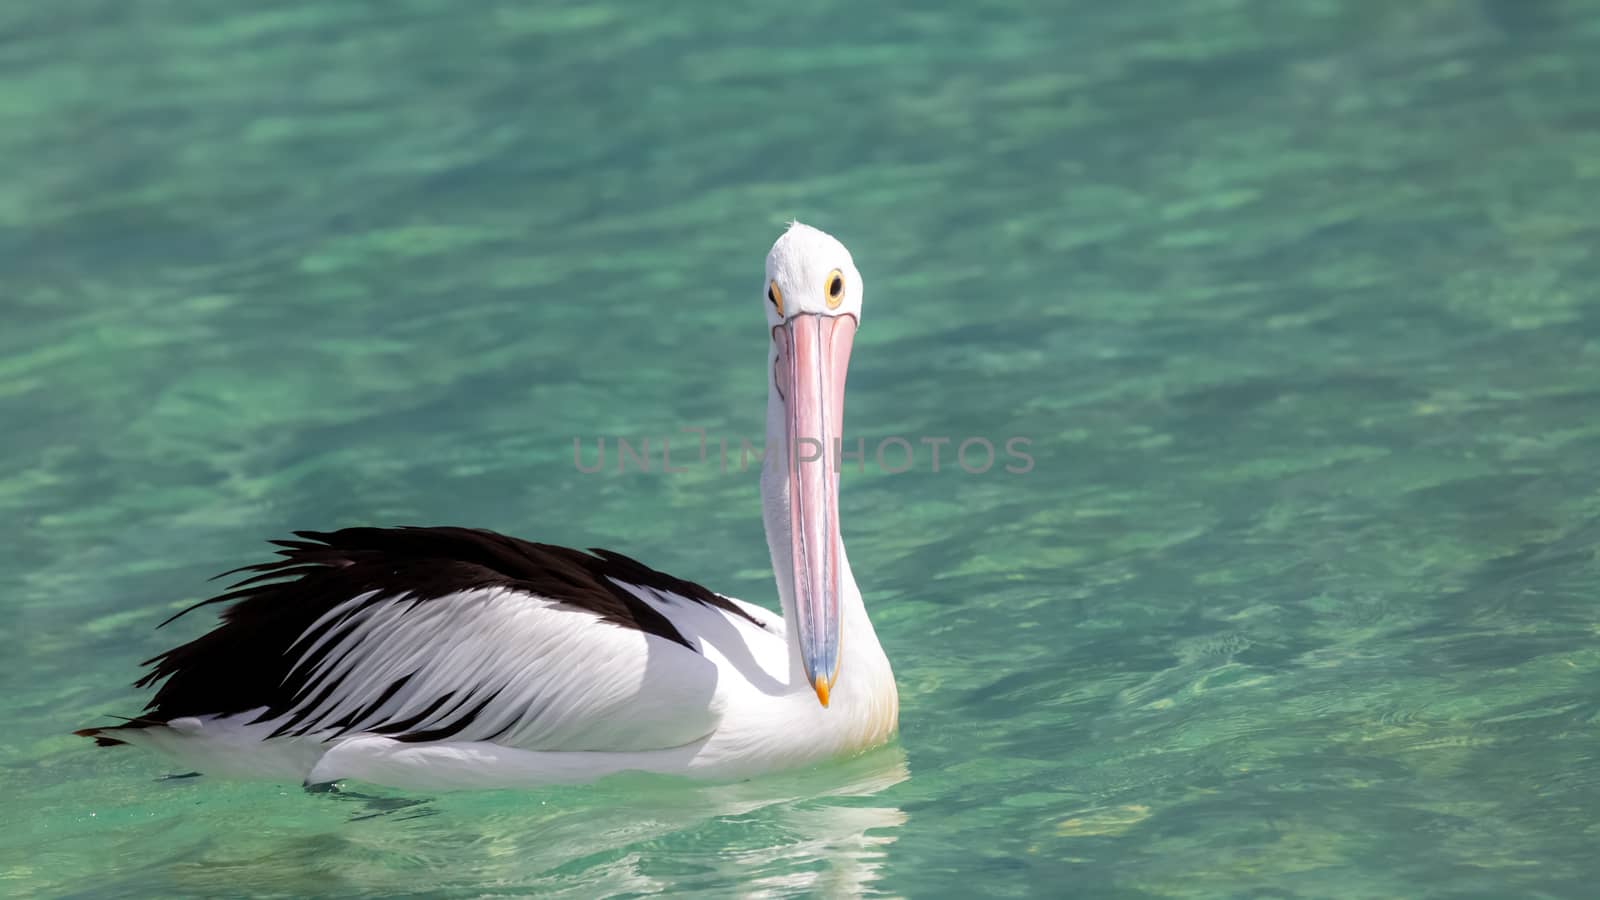 An image of a nice pelican in the australian sea